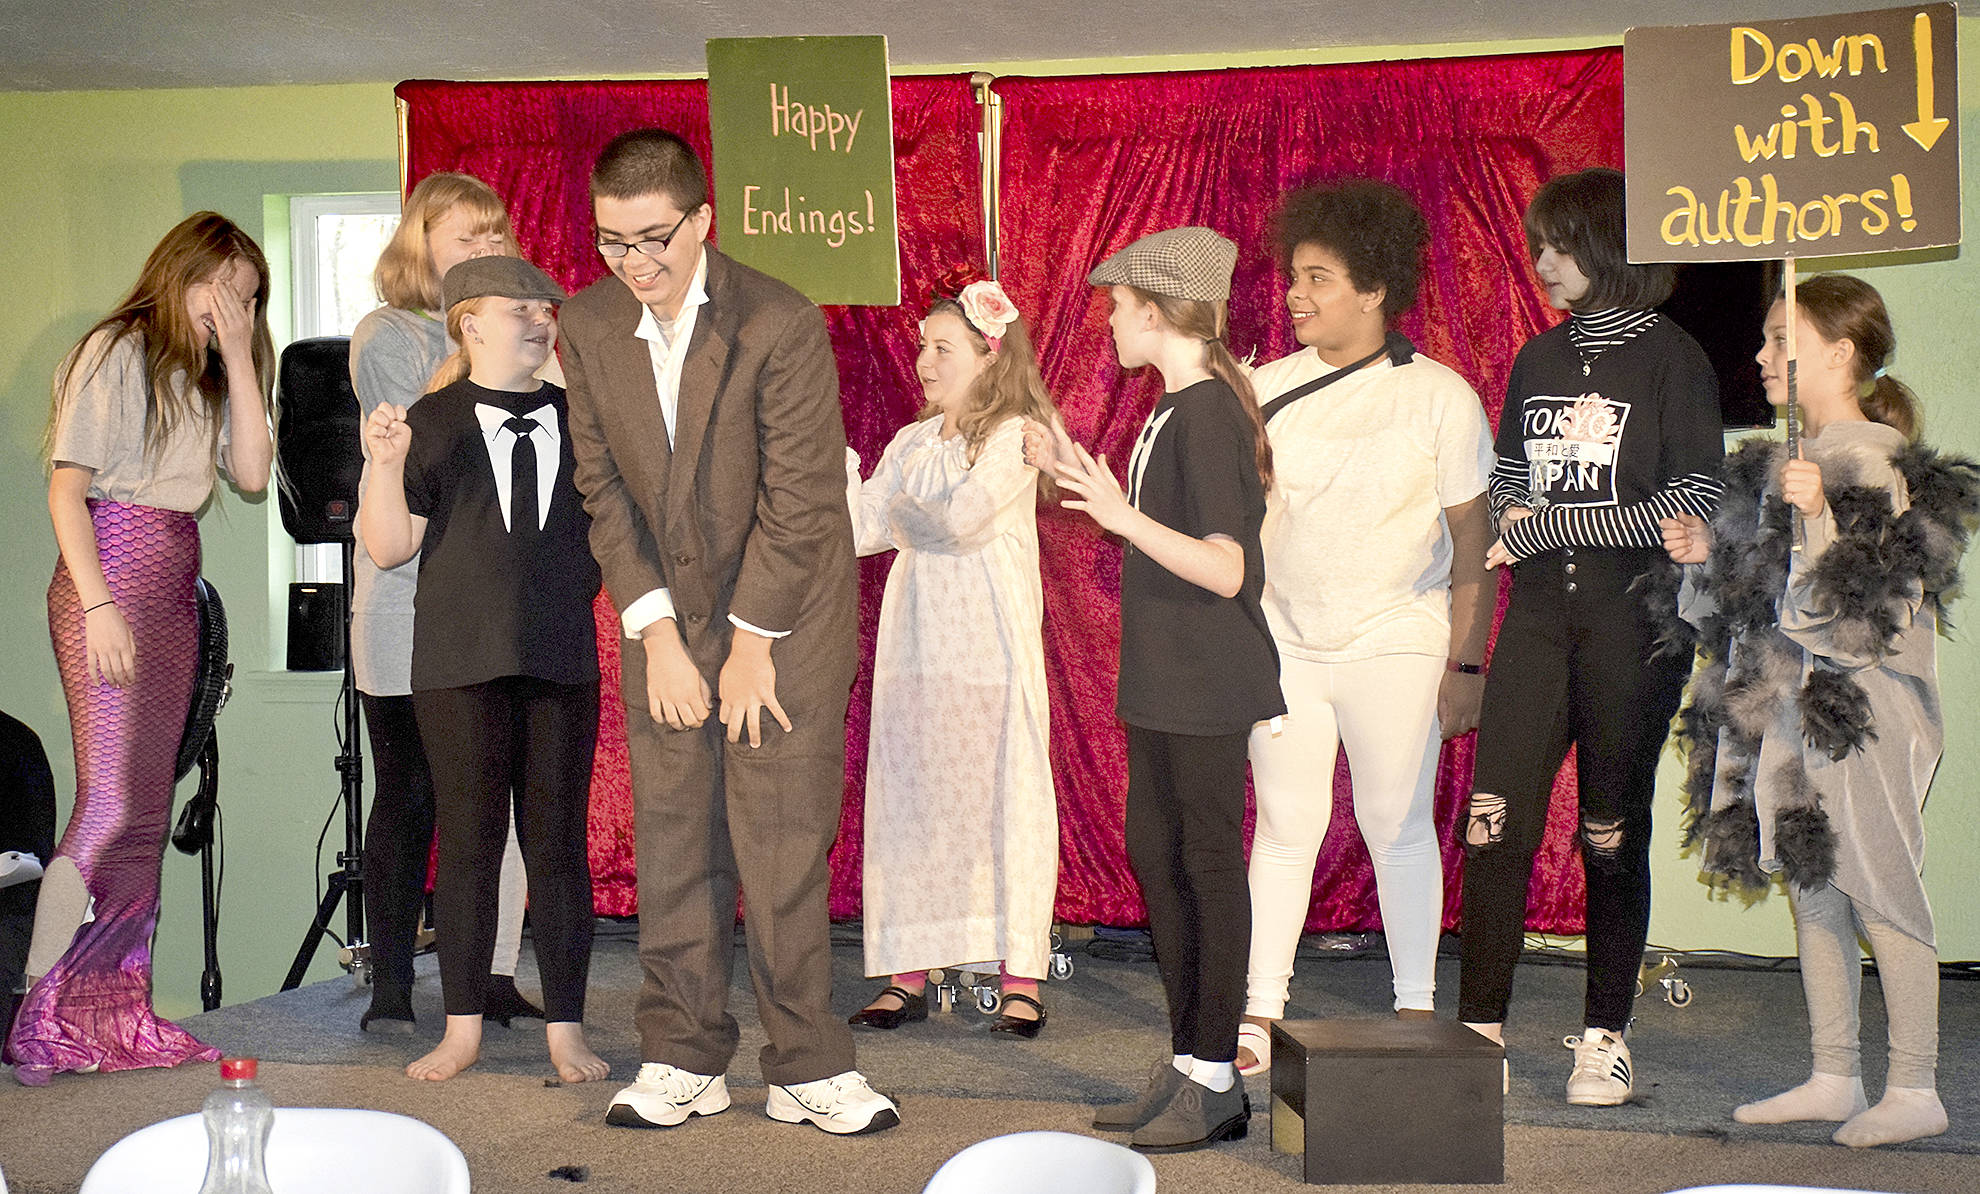 Scott D. Johnston | For Grays Harbor News Group                                The cast of “A Grimm Night for Hans Christian Andersen,” from left: Keira Gibson, Chloe Patton, Addi Baggaley, Jacob Francis, Taitlynn Baggaley, Samara Gibson, Makayla Upshaw, Michelle Arape and Megan Christensen.